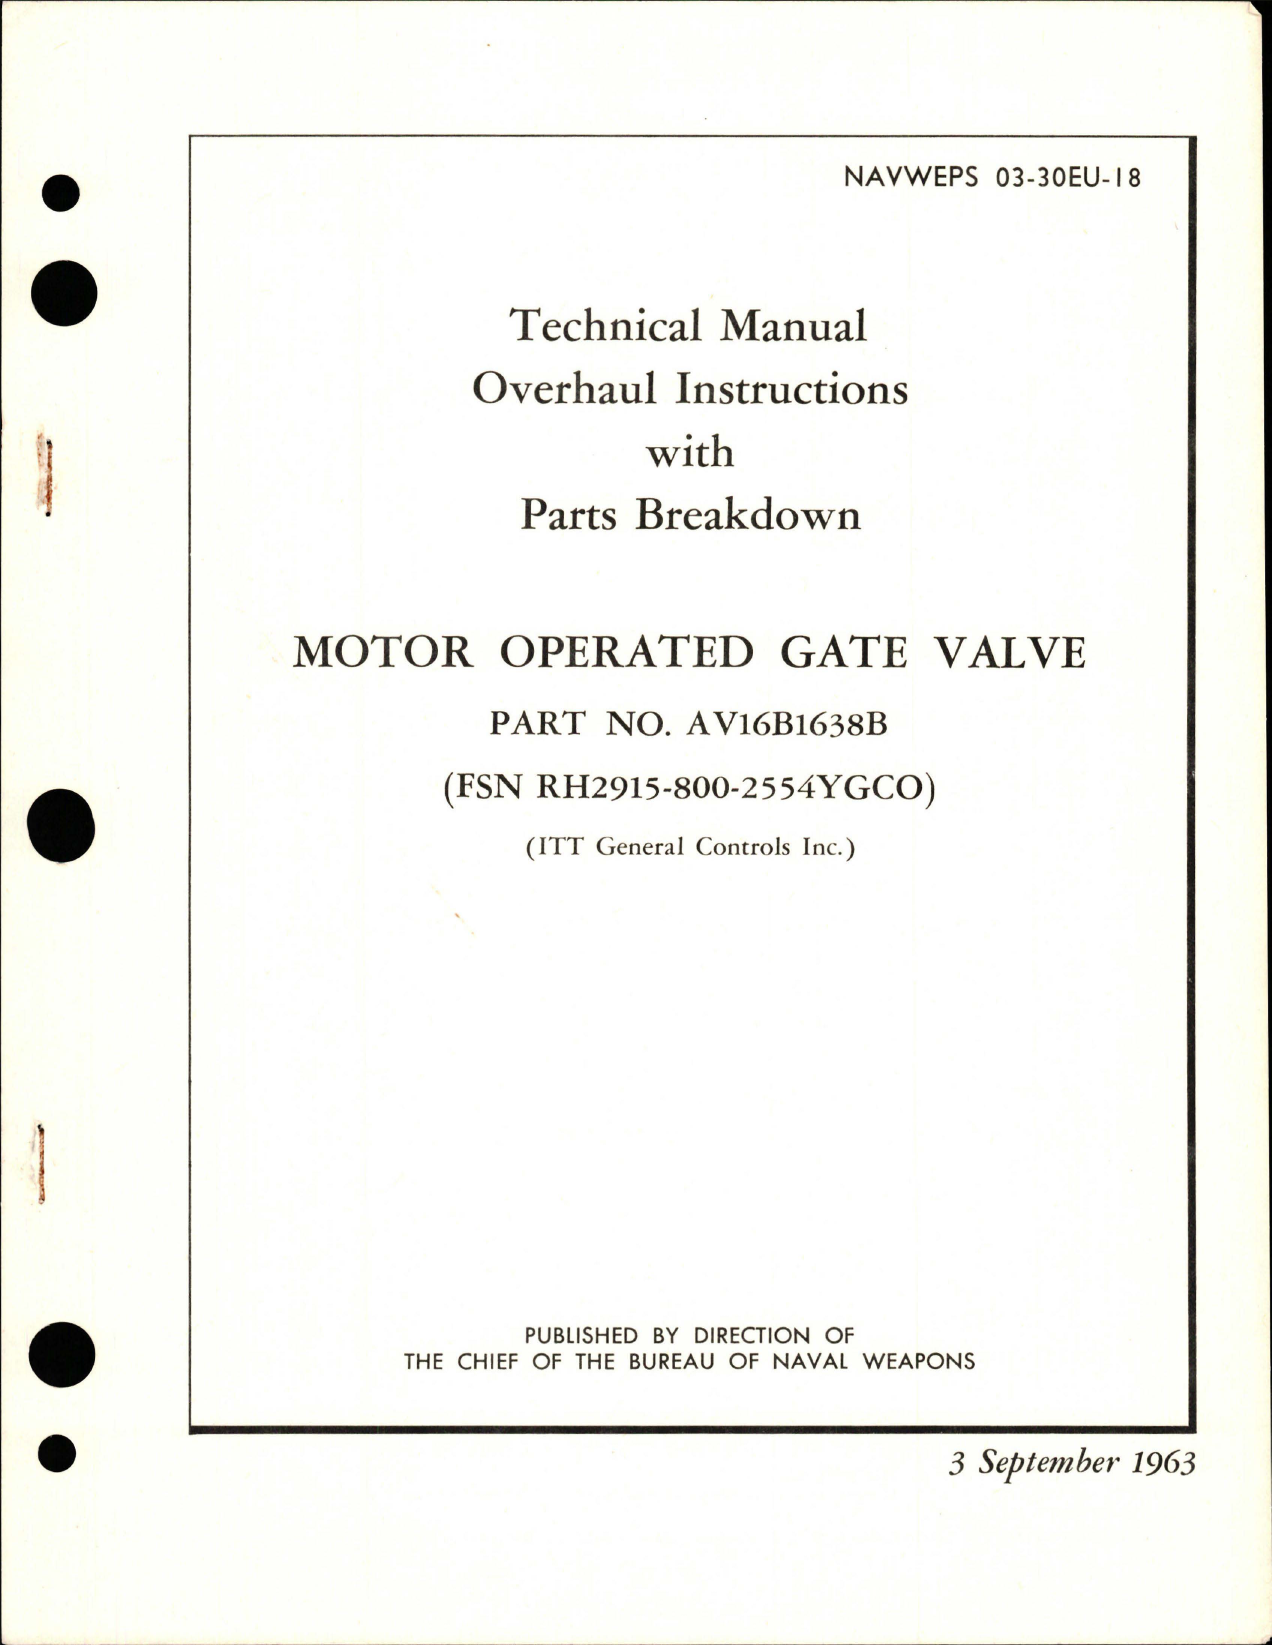 Sample page 1 from AirCorps Library document: Overhaul Instructions with Parts Breakdown for Motor Operated Gate Valve - Part AV16B1638B